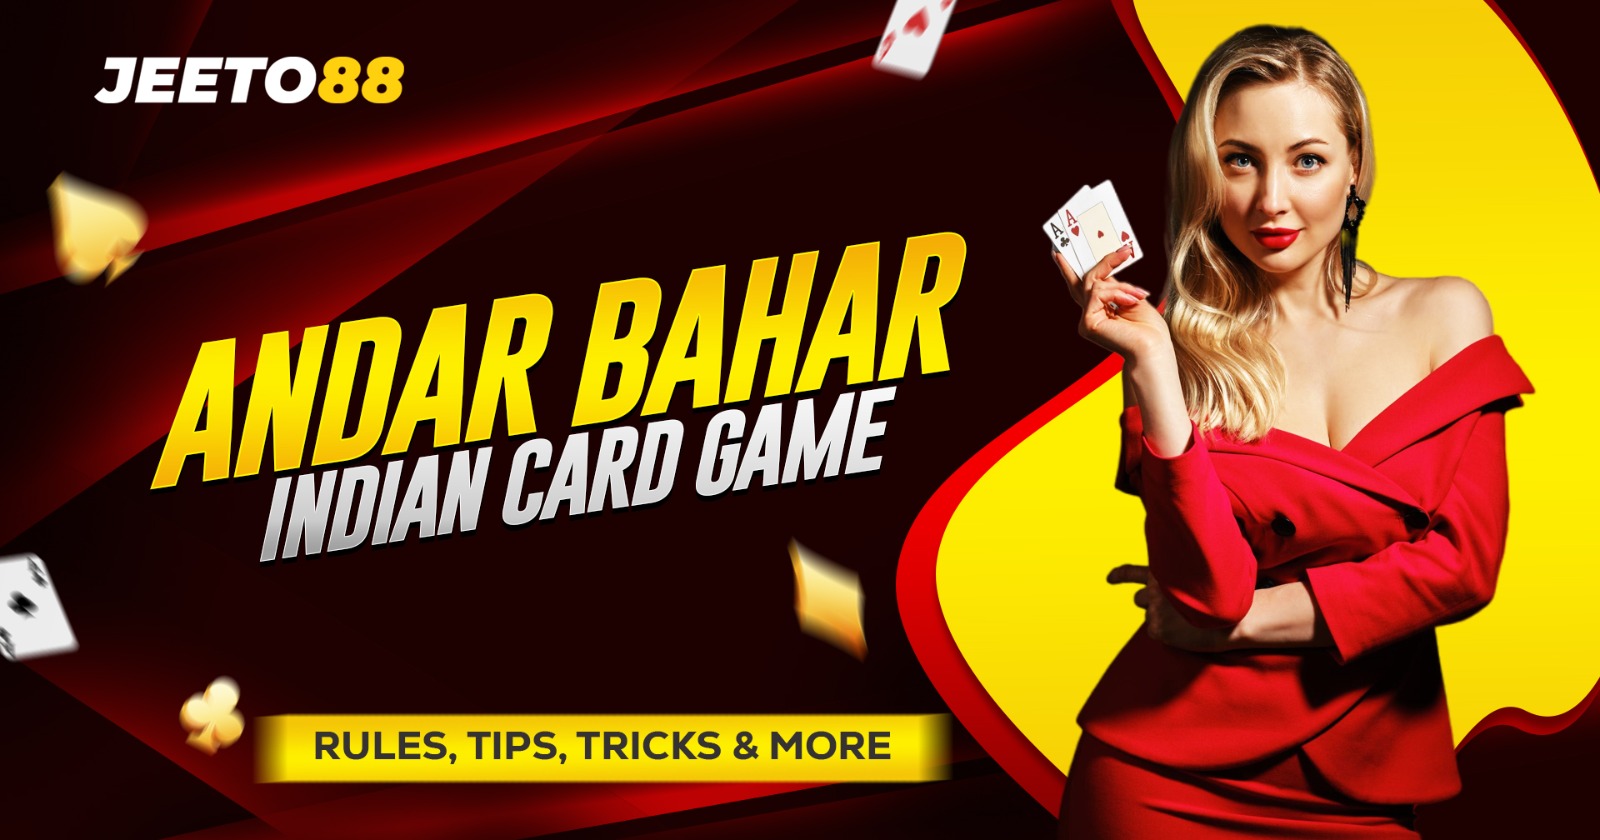 Andar Bahar Indian Card Game: Rules, Tips, Tricks on Jeeto88 » WingsMyPost